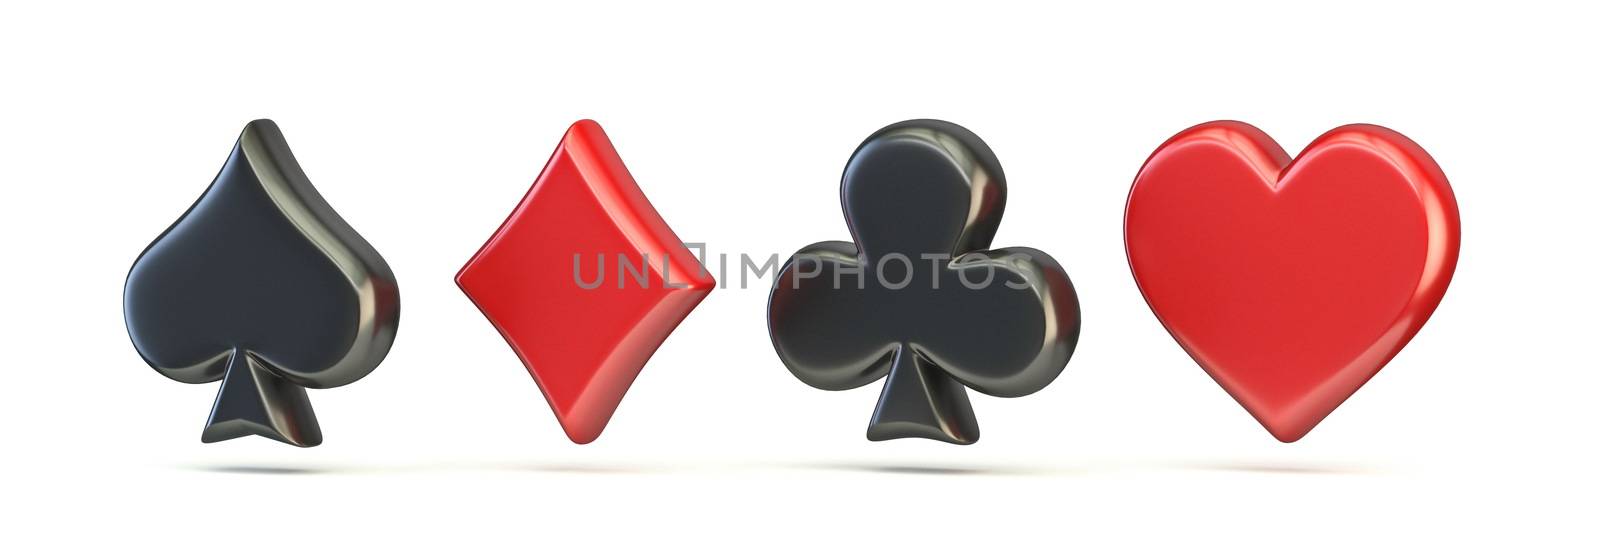 Spade, diamond, club and heart 3D render illustration isolated on white background